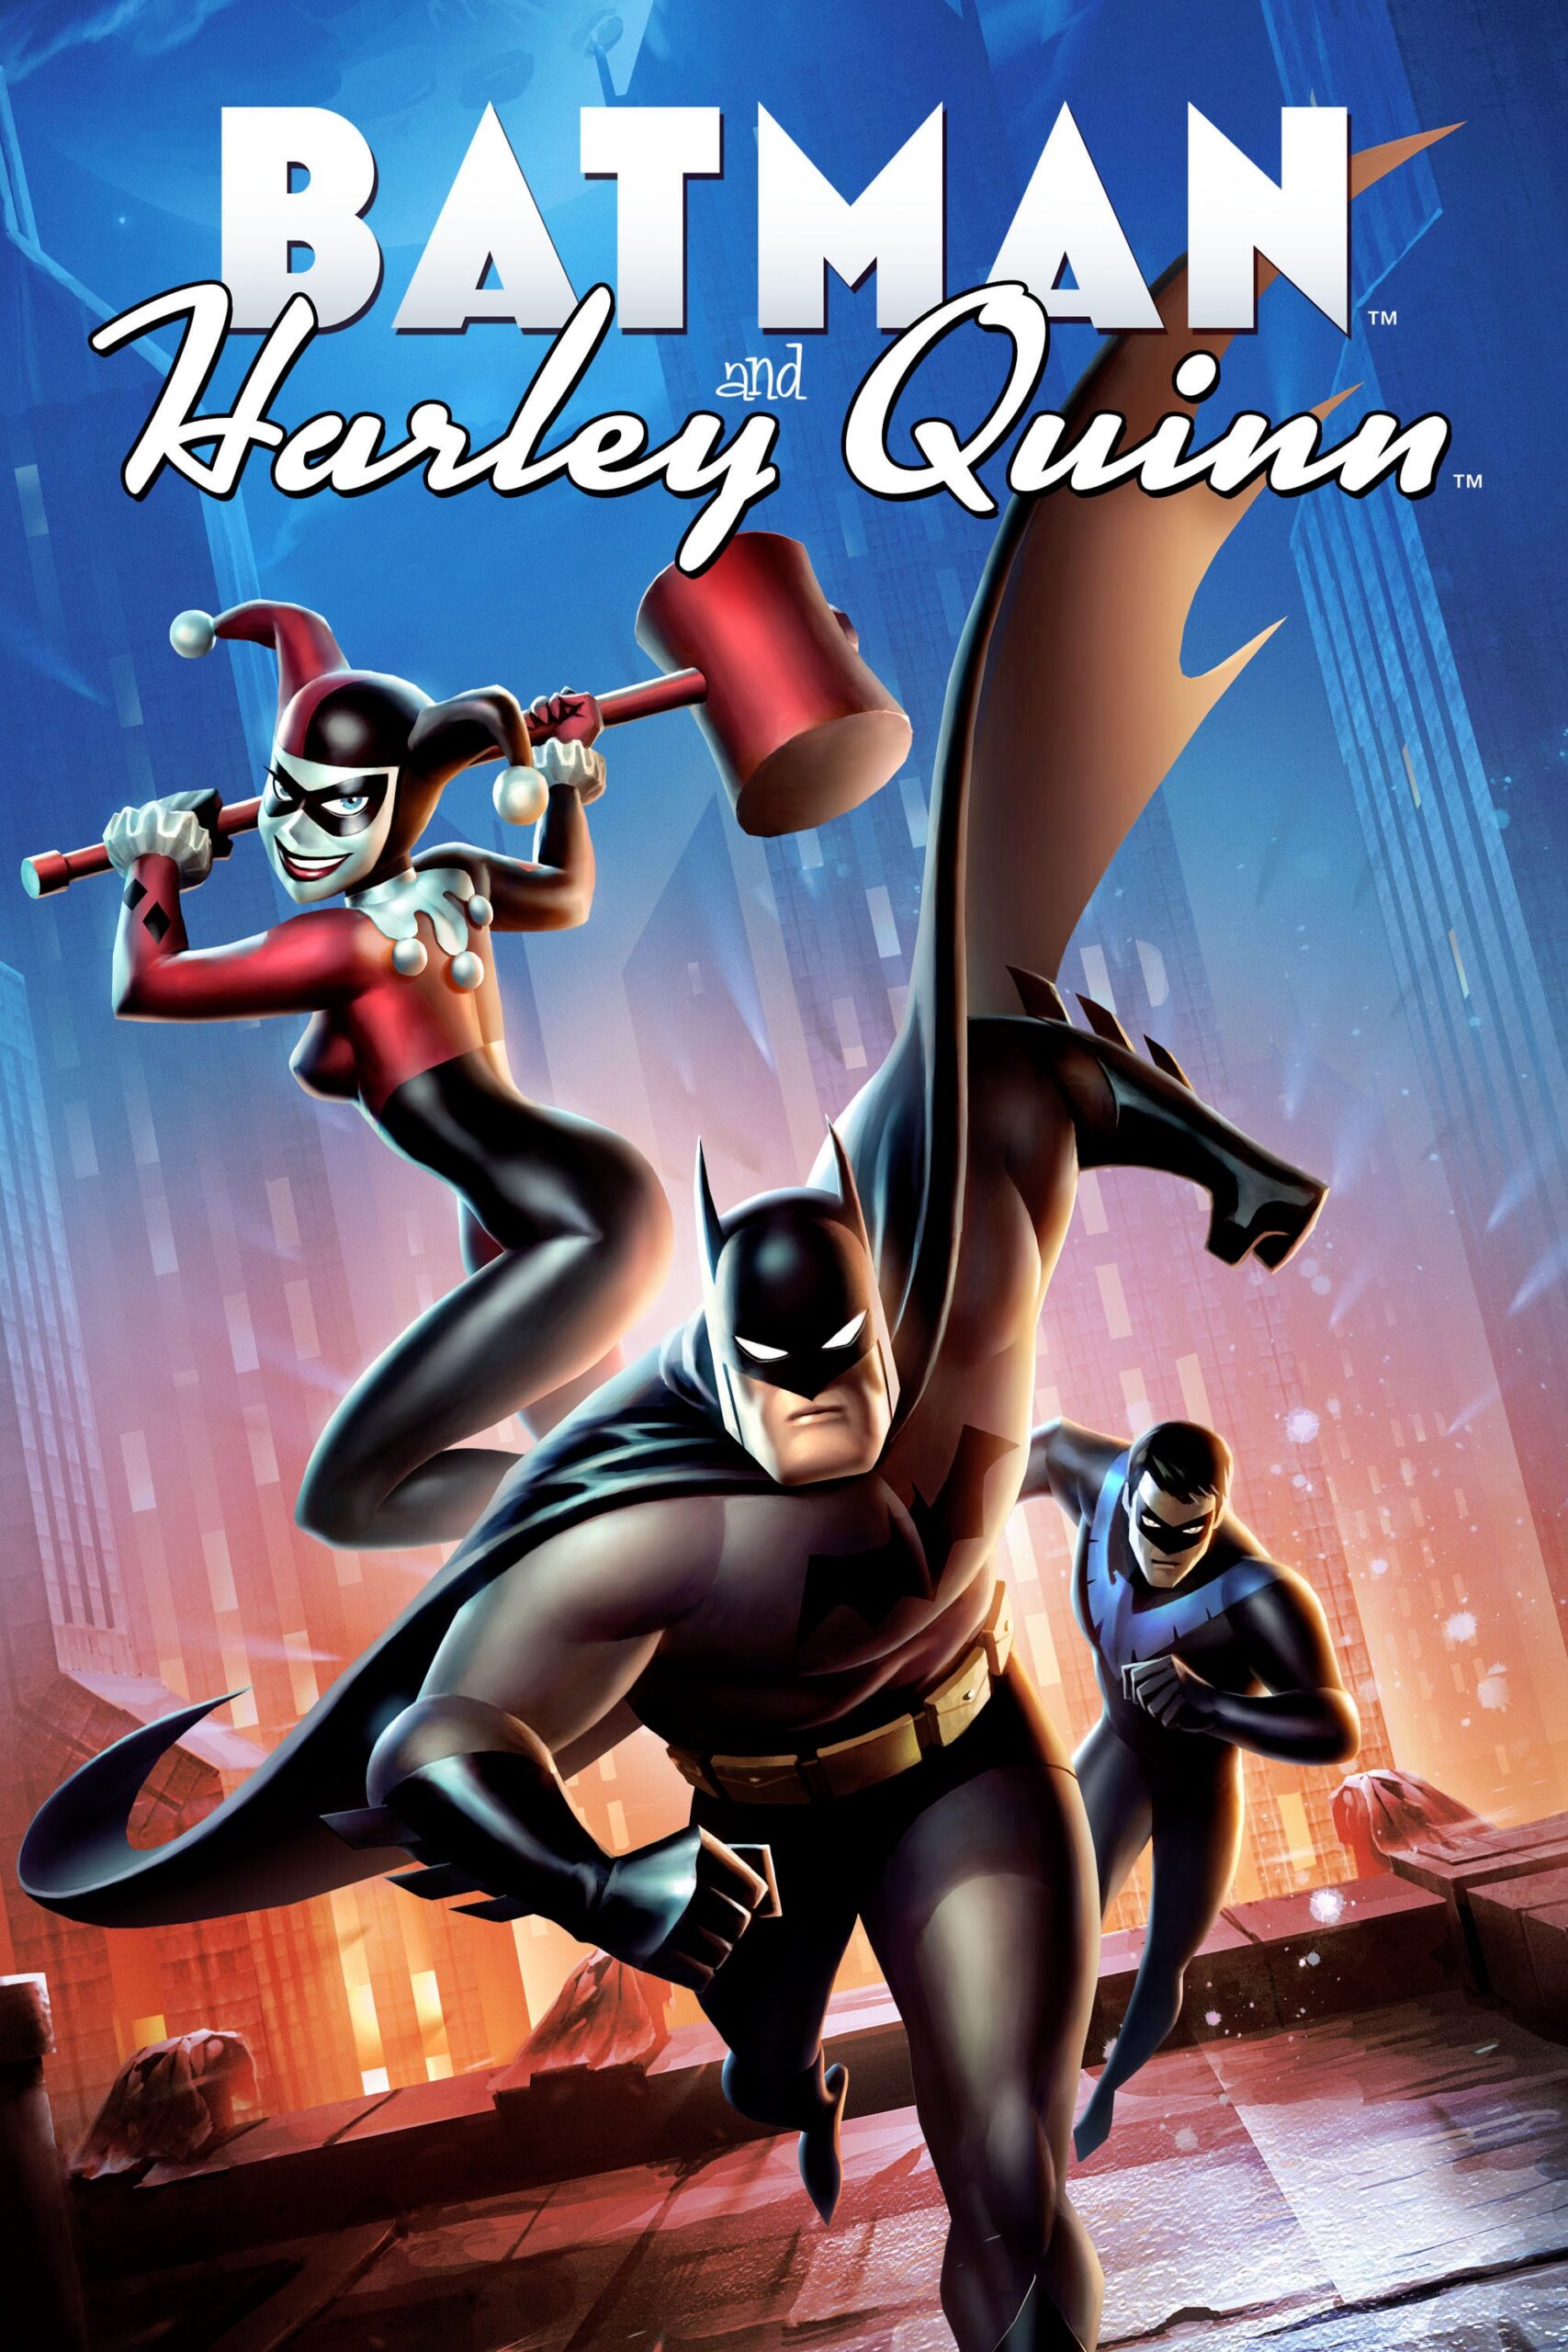 Poster for the movie "Batman and Harley Quinn"